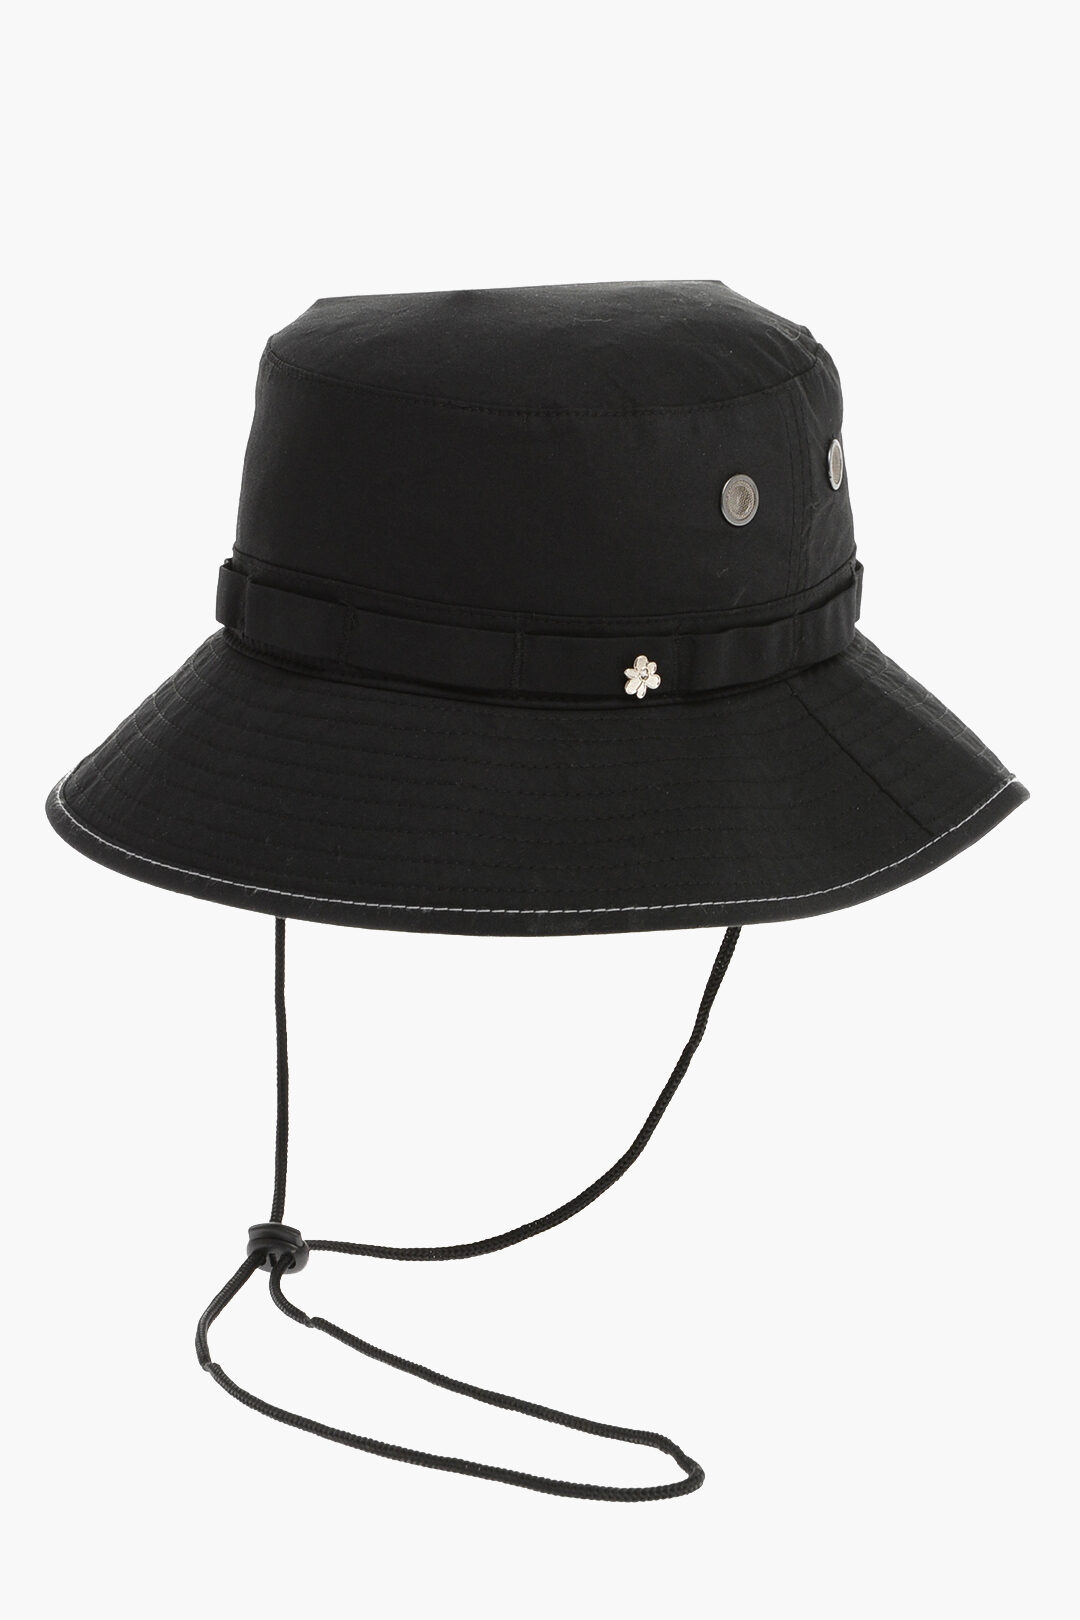 Perks and Mini Cotton Blend Bucket Hat with Strap men - Glamood Outlet